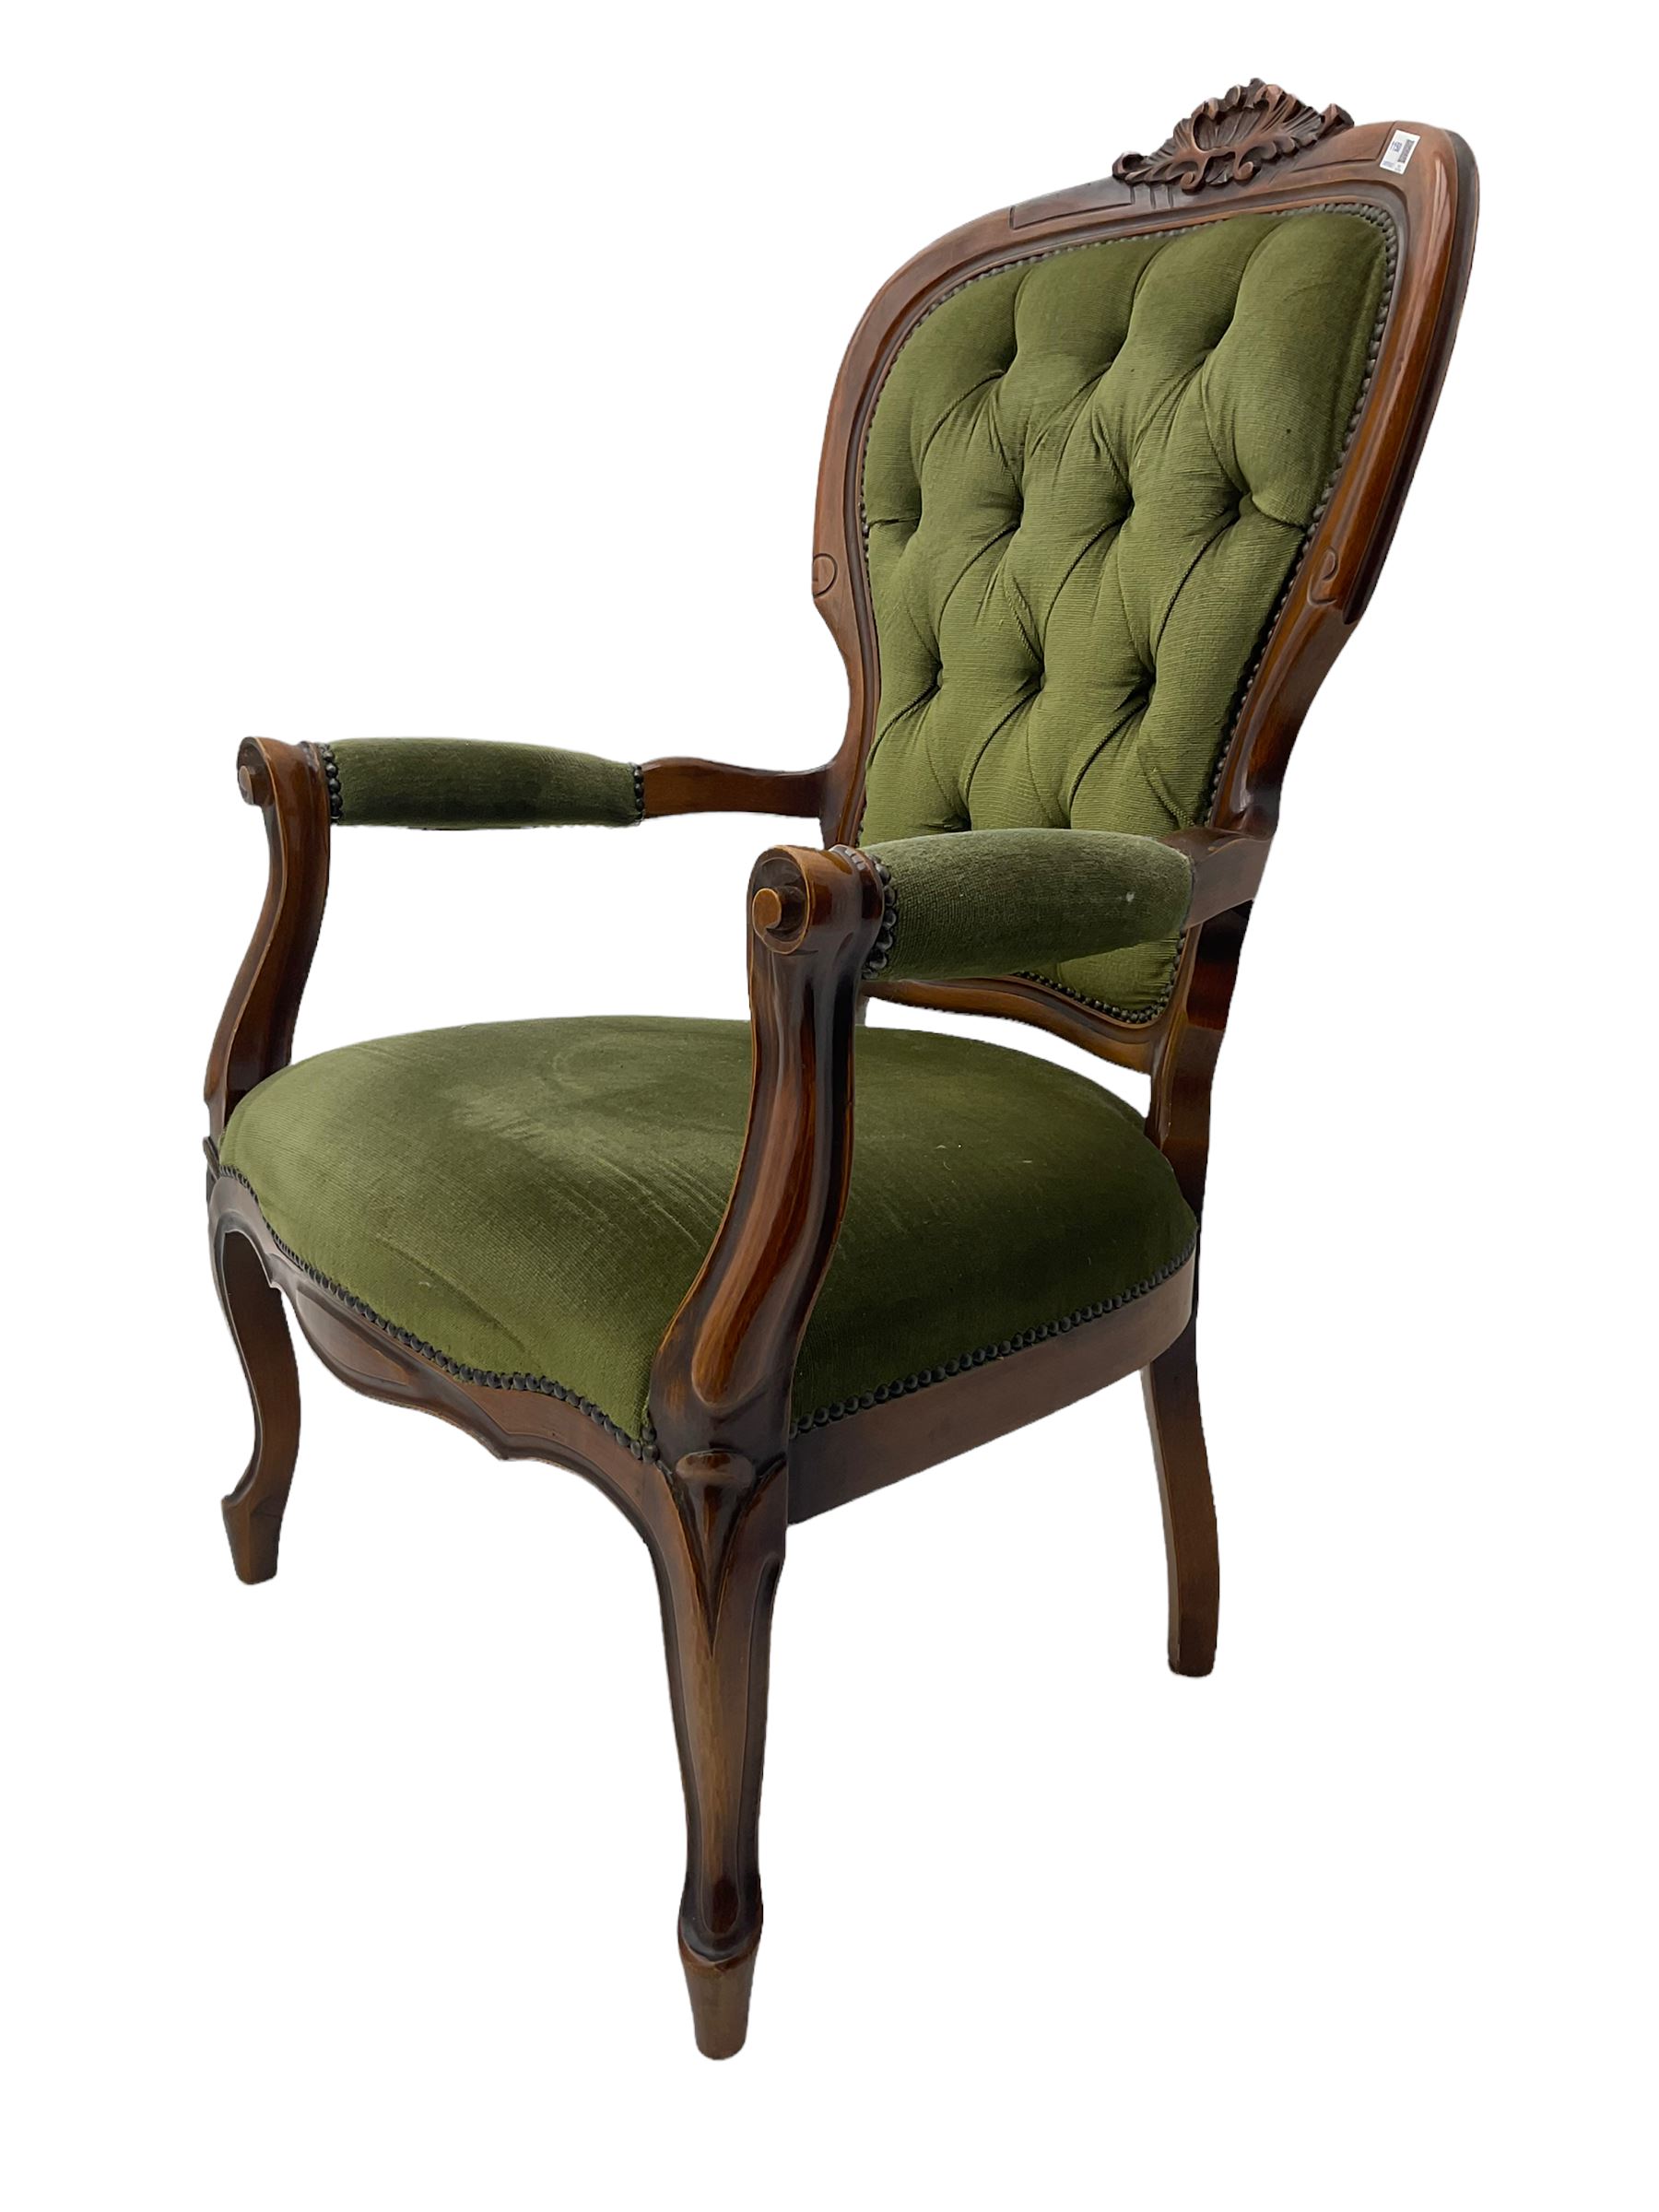 Victorian style stained beech armchair - Image 2 of 6